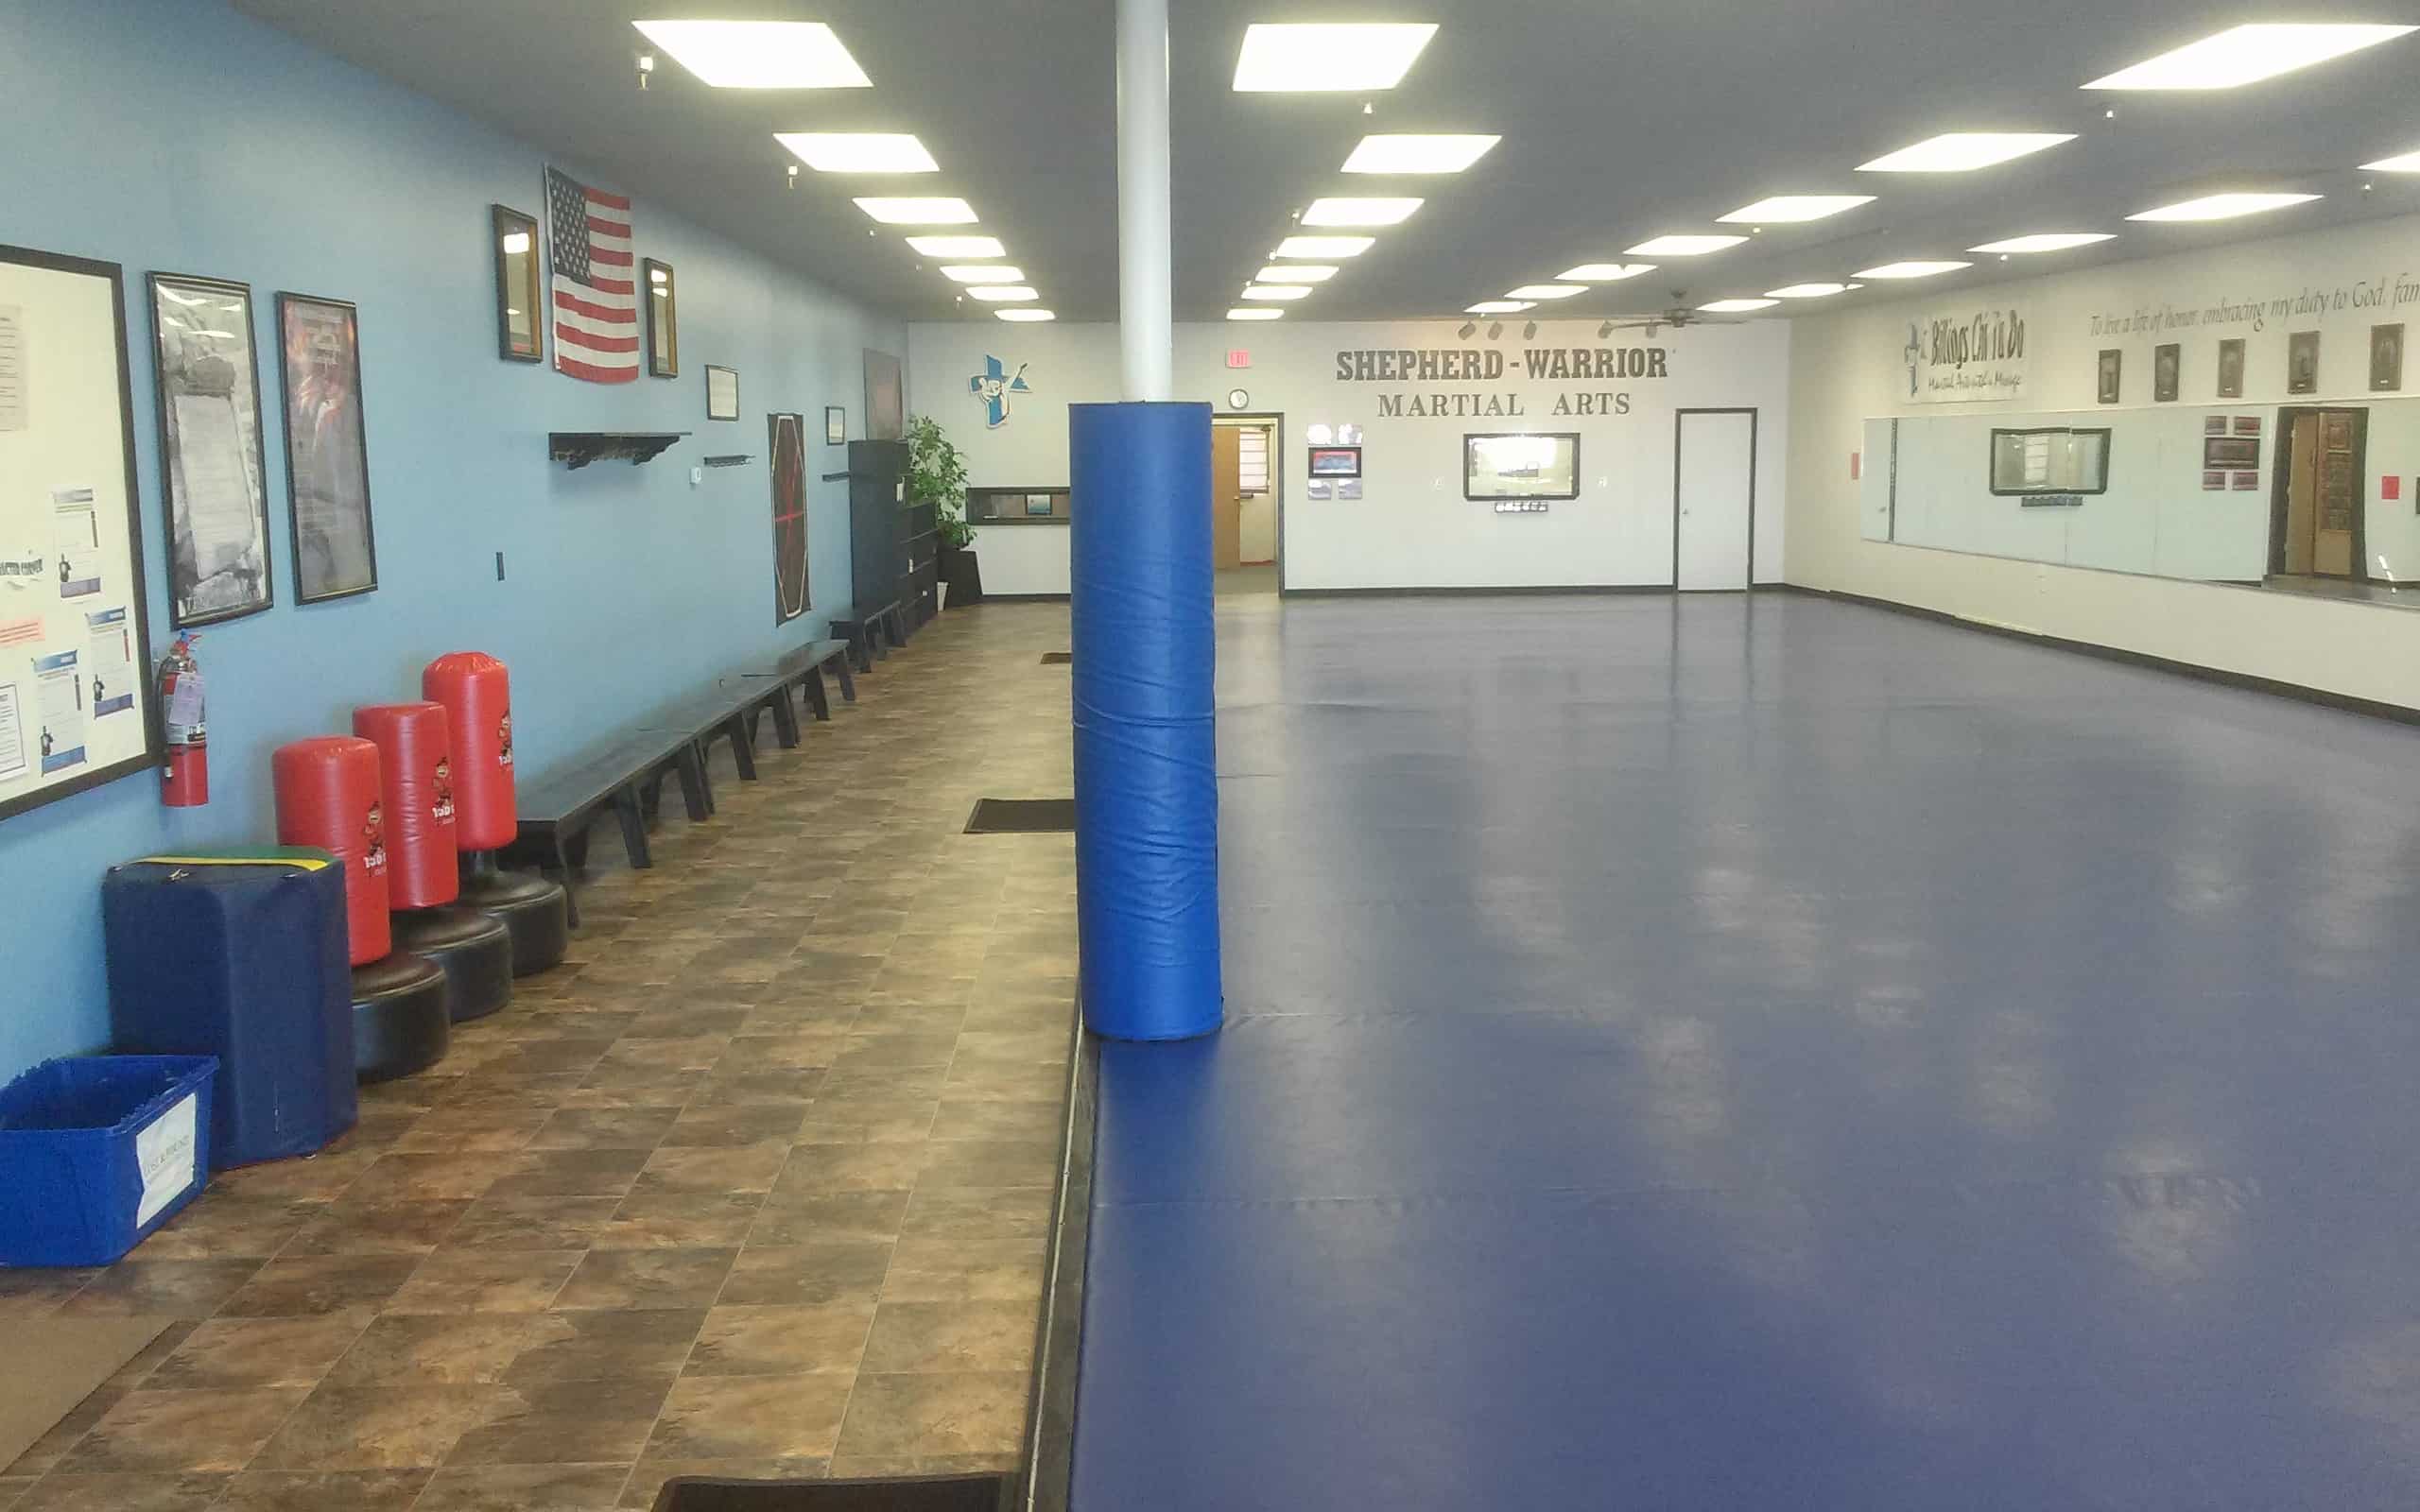 Bench where parents watch their children during classes at Shepherd-Warrior Martial Arts